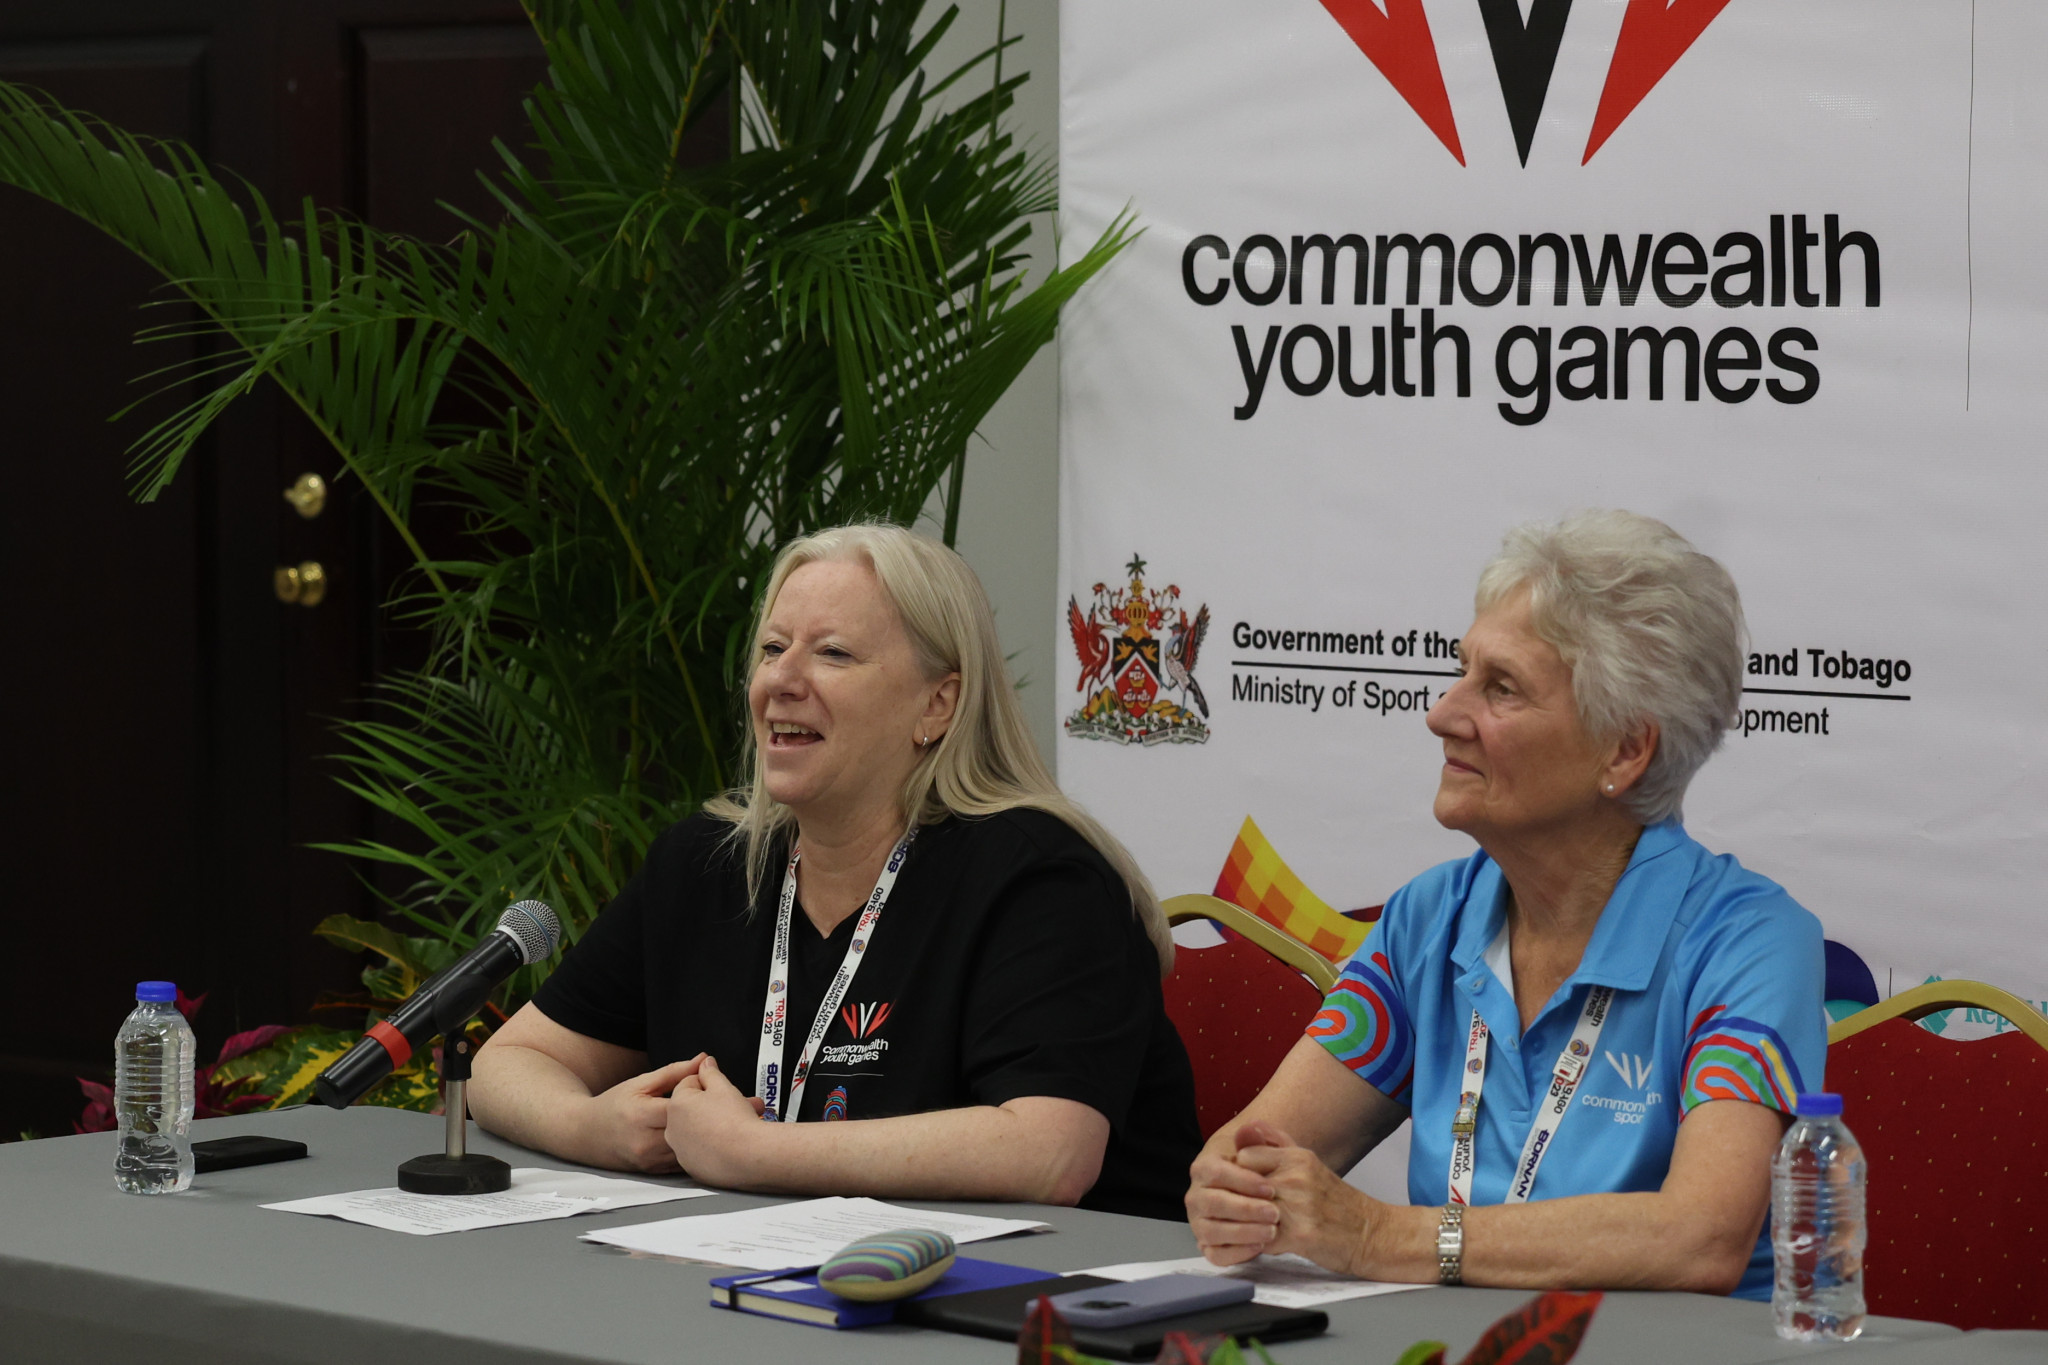 CGF discusses 2026 Commonwealth Games options but wants focus to remain on Trinbago 2023